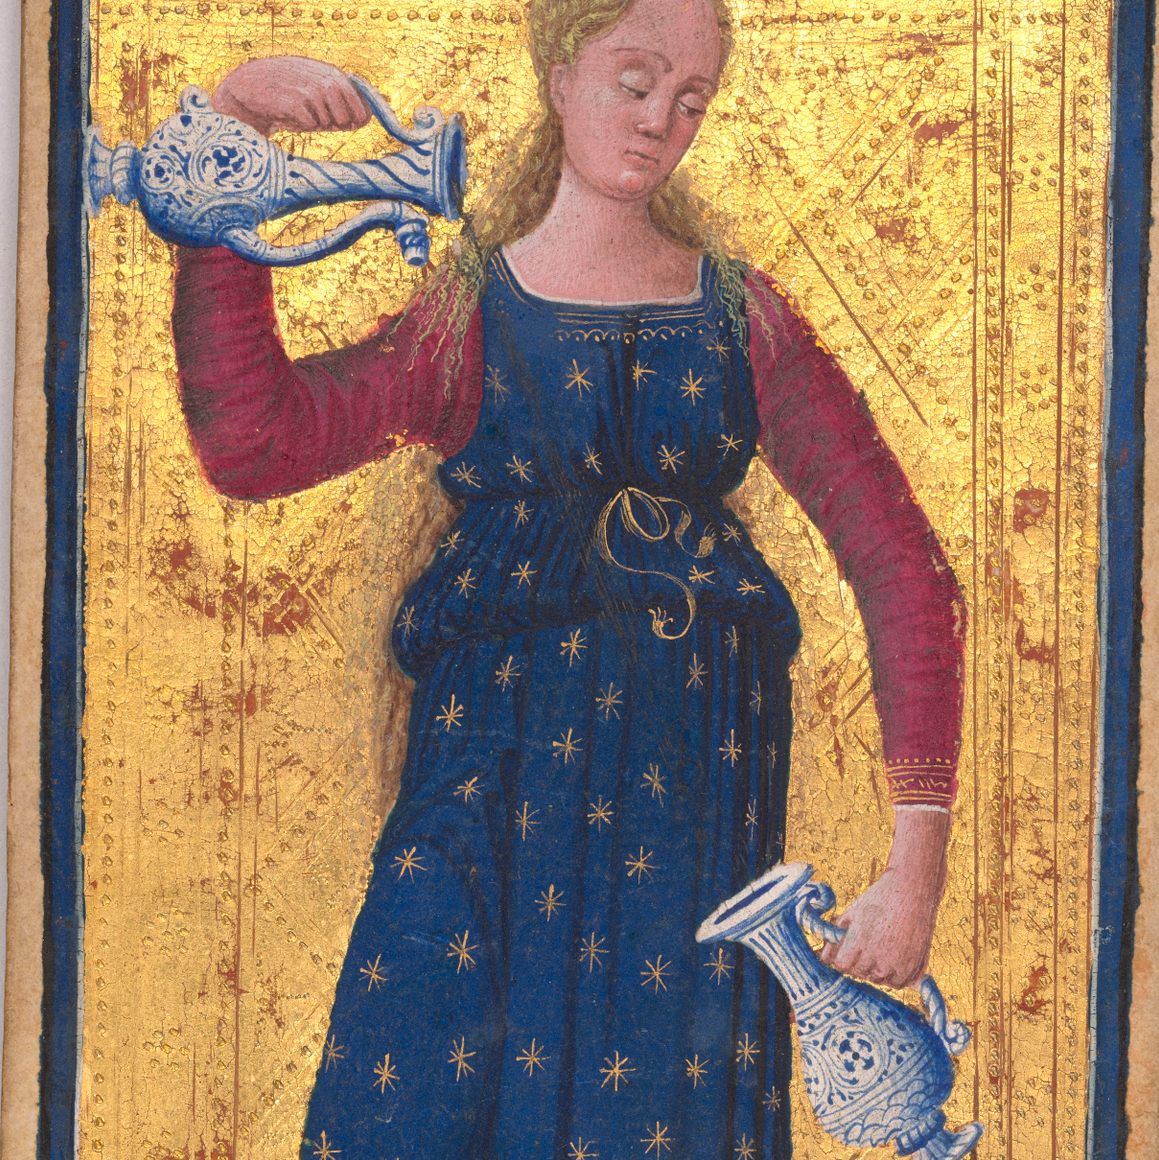 Temperance - MLM65950: The Morgan Library & Museum, MS M.630.5. Photography by Graham S. Haber